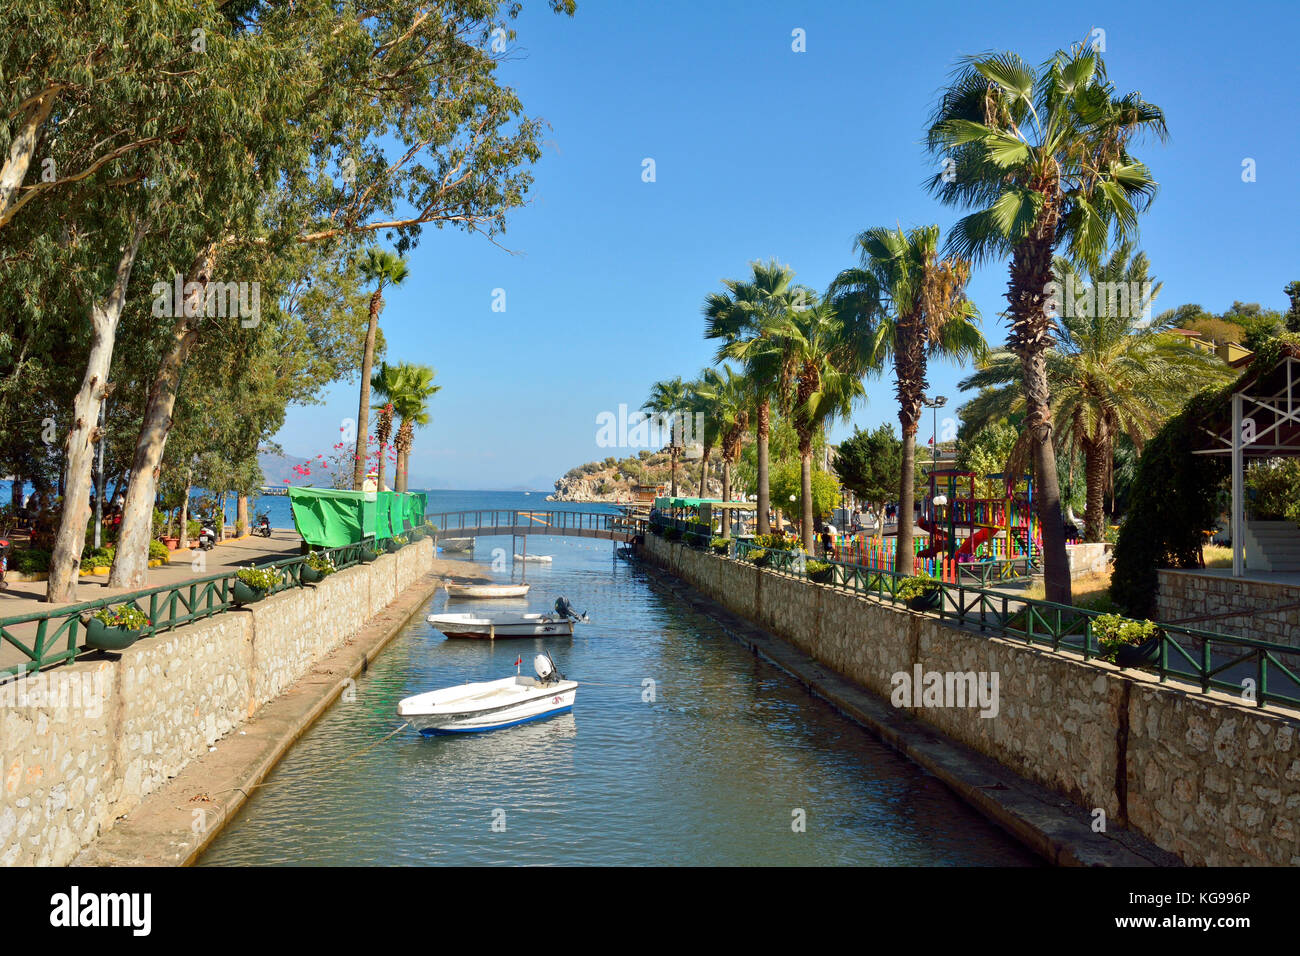 Turunc, Mugla, Turkey - October 9, 2016. Canal in Turunc suburb of Marmaris restory town in Turkey, with boats and vegetation. Stock Photo